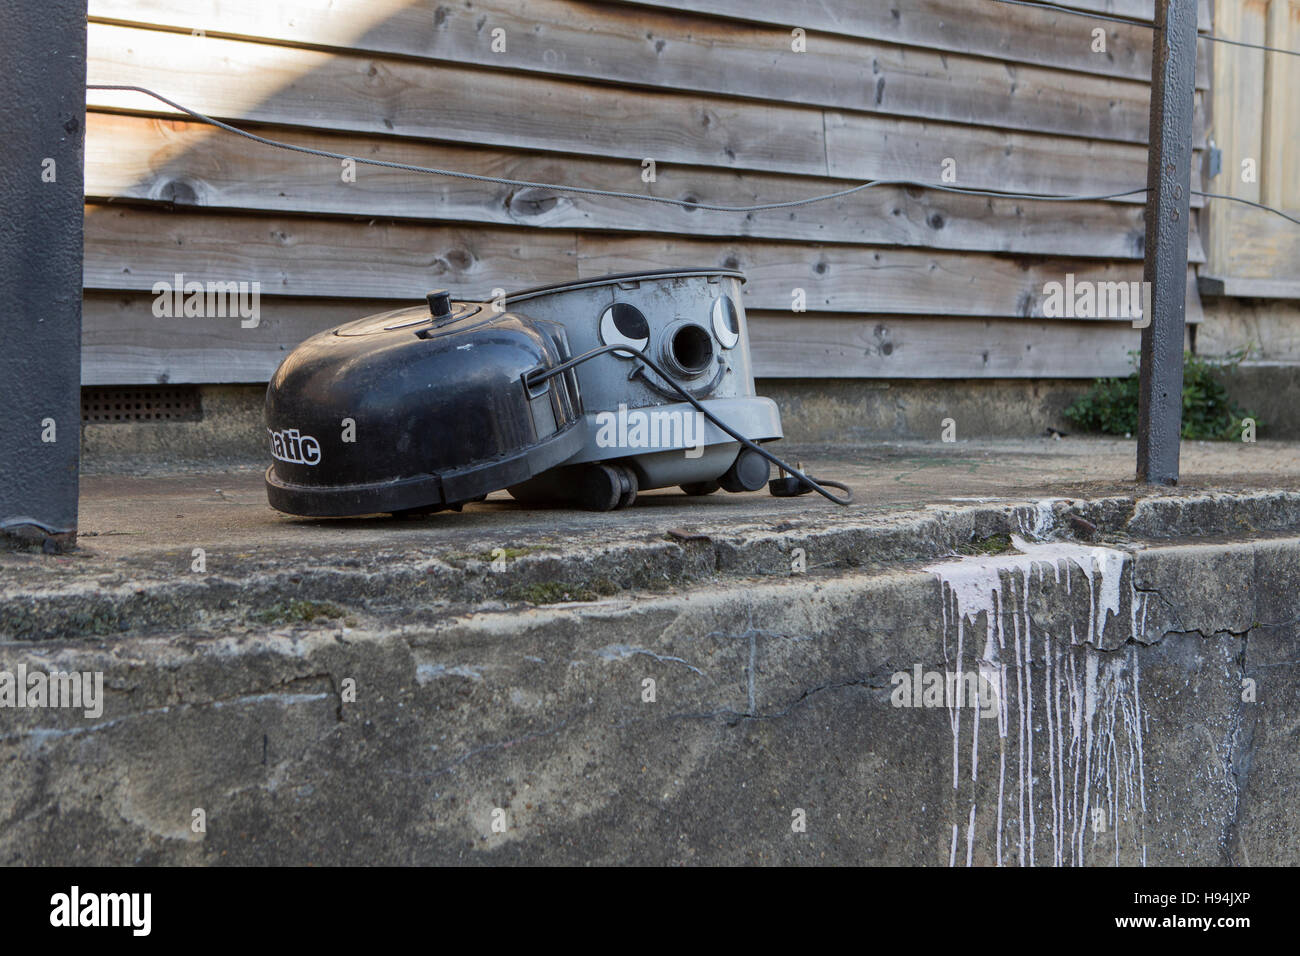 A discarded Henry style vacuum cleaner. Stock Photo